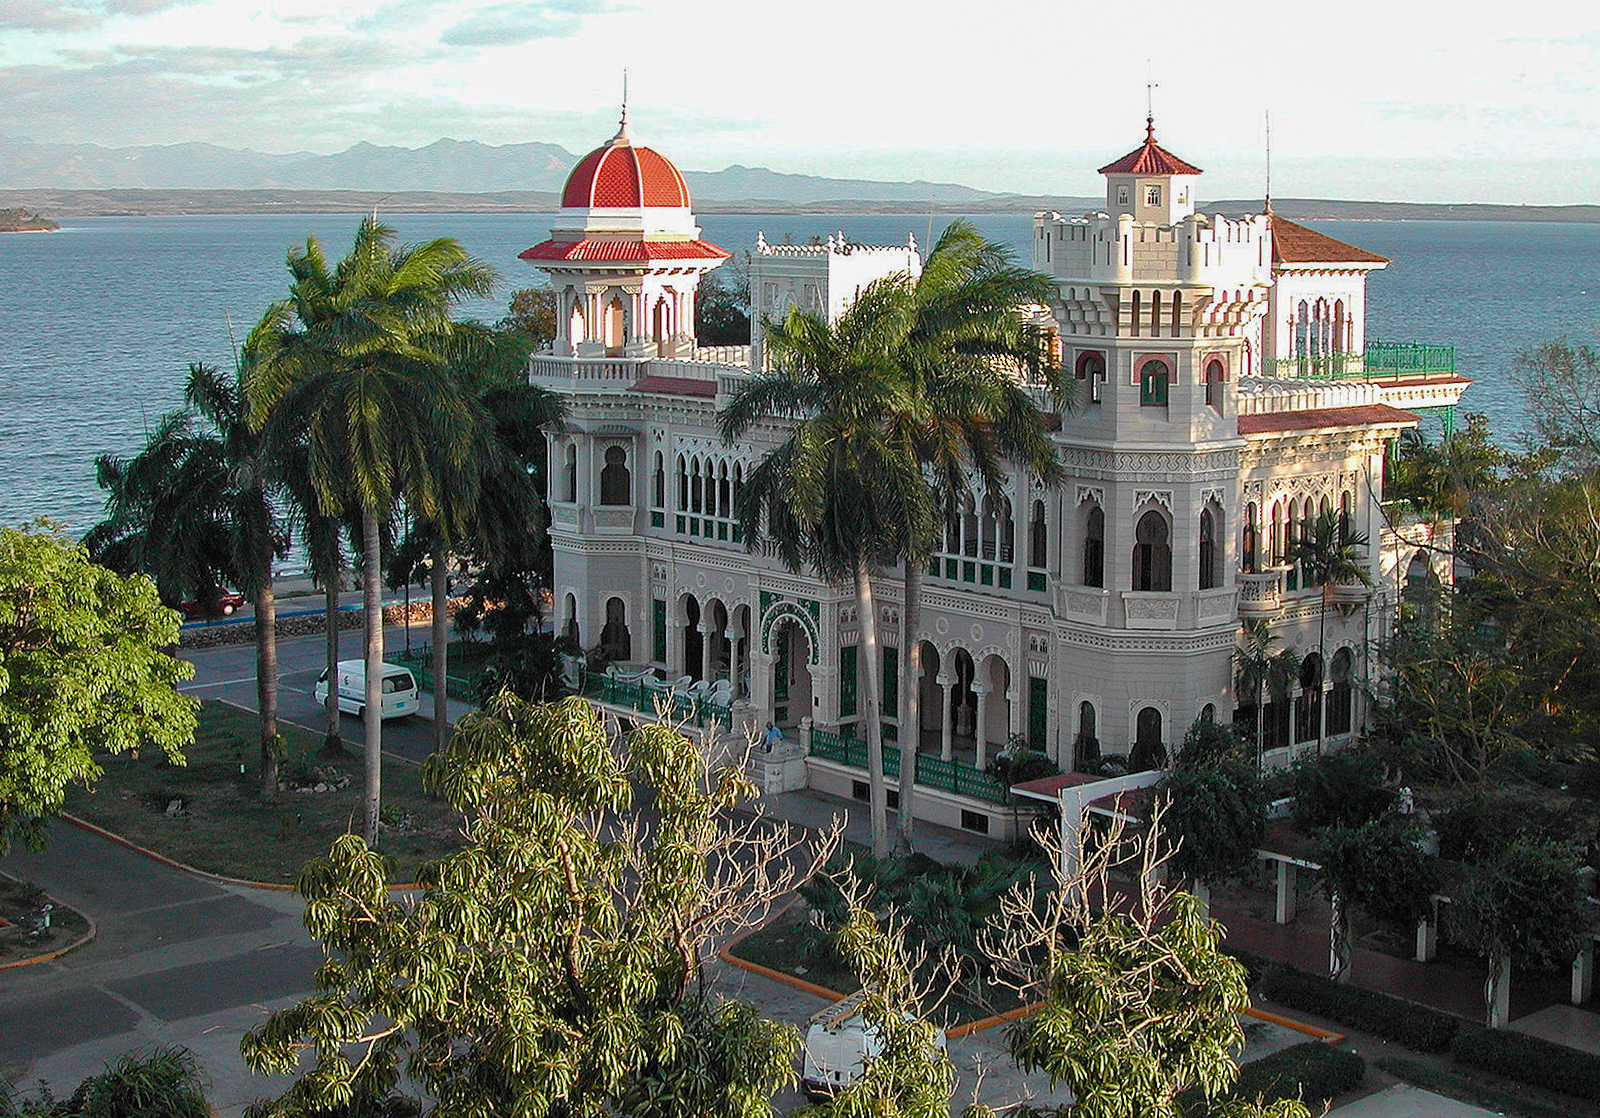 Mansion in the Moorish Revival architecture style